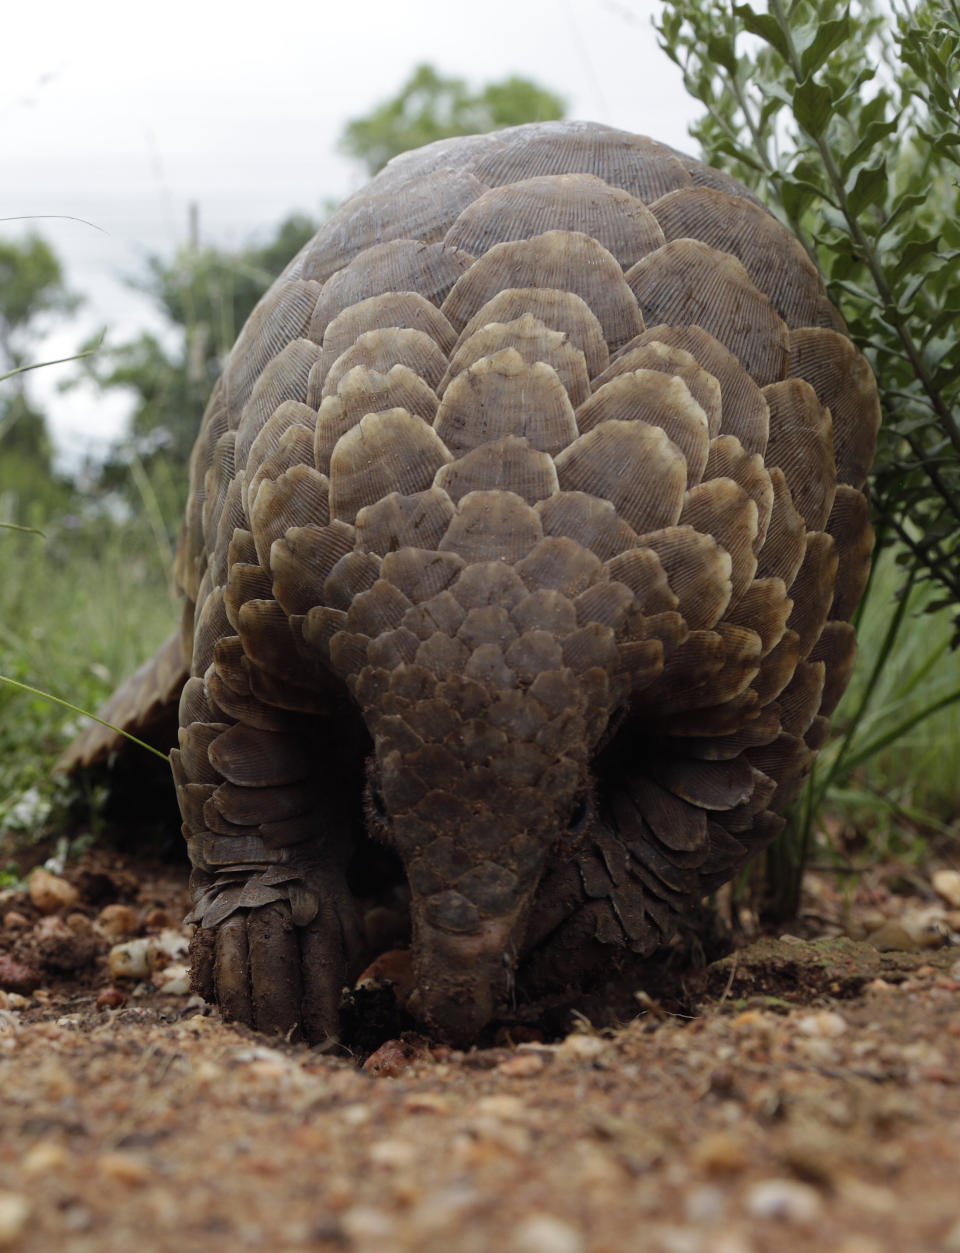 In this photo taken on Friday, Feb. 15, 2019, a pangolin looks for food on a private property in Johannesburg, South Africa. As World Pangolin Day is marked around the globe, Saturday, some conservationists in South Africa are working to protect the endangered animals, including caring for a few that have been rescued from traffickers. (AP Photo/Themba Hadebe)